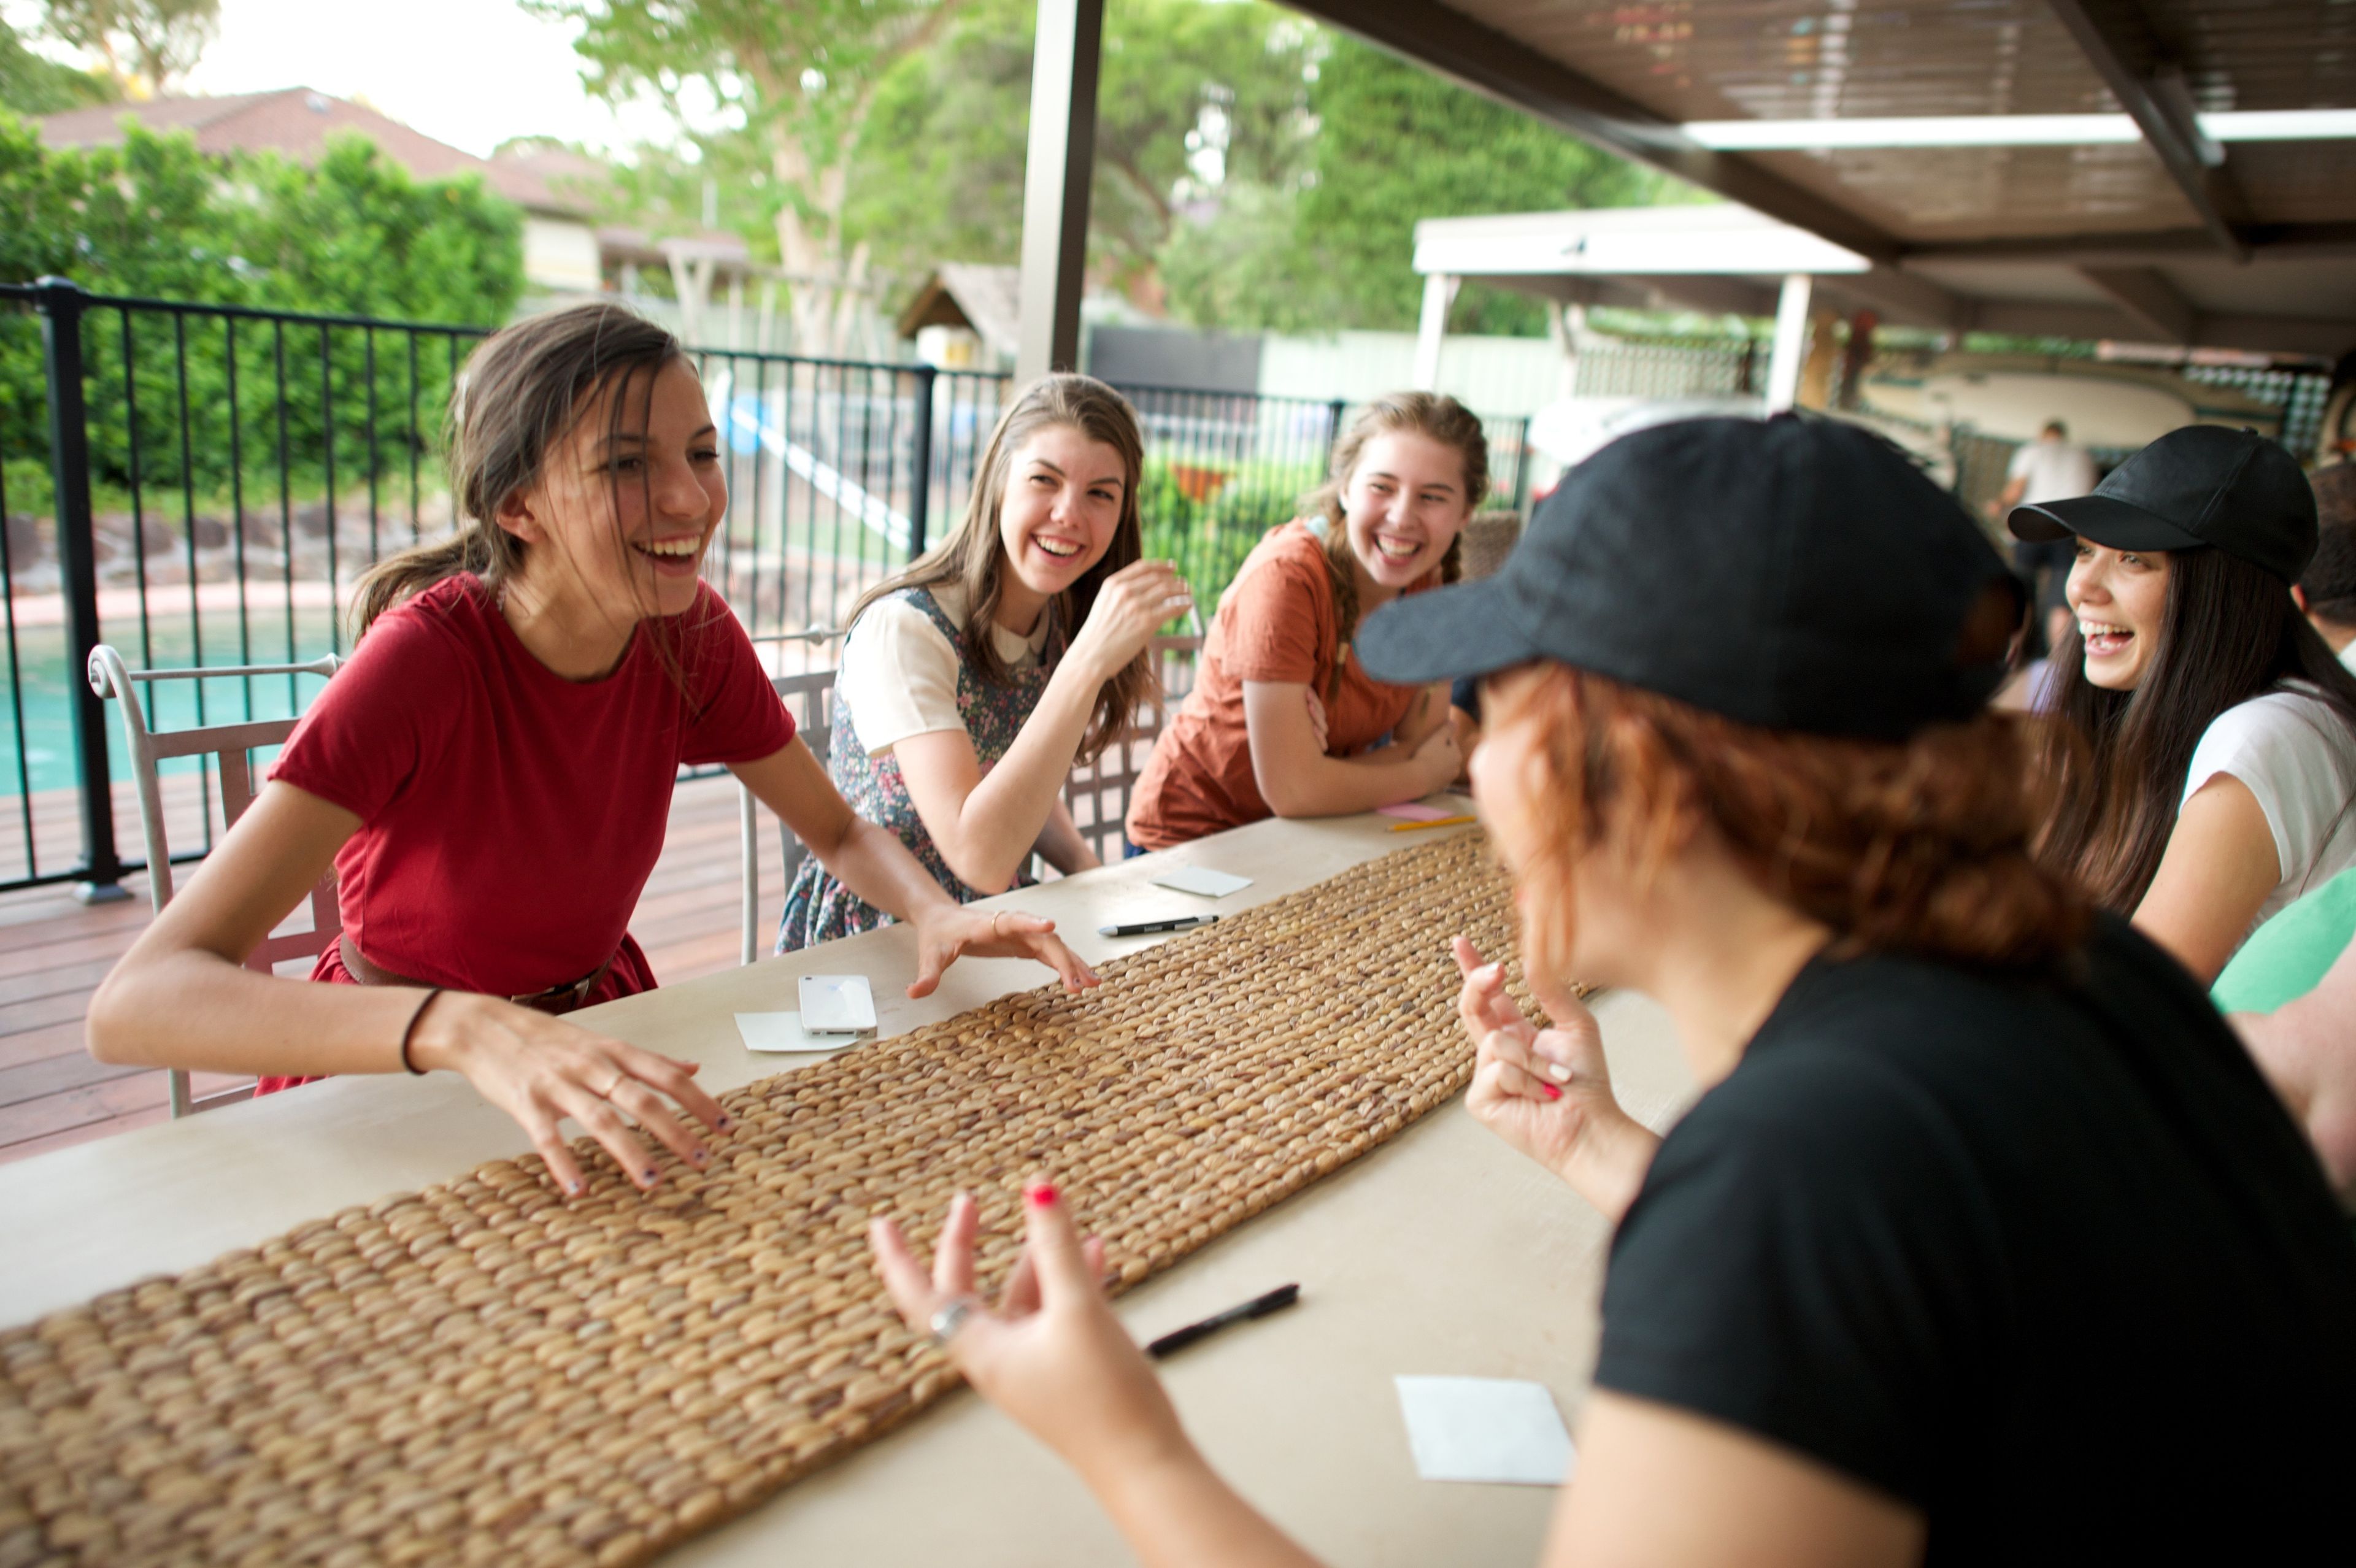 A group of young women playing games outside together.